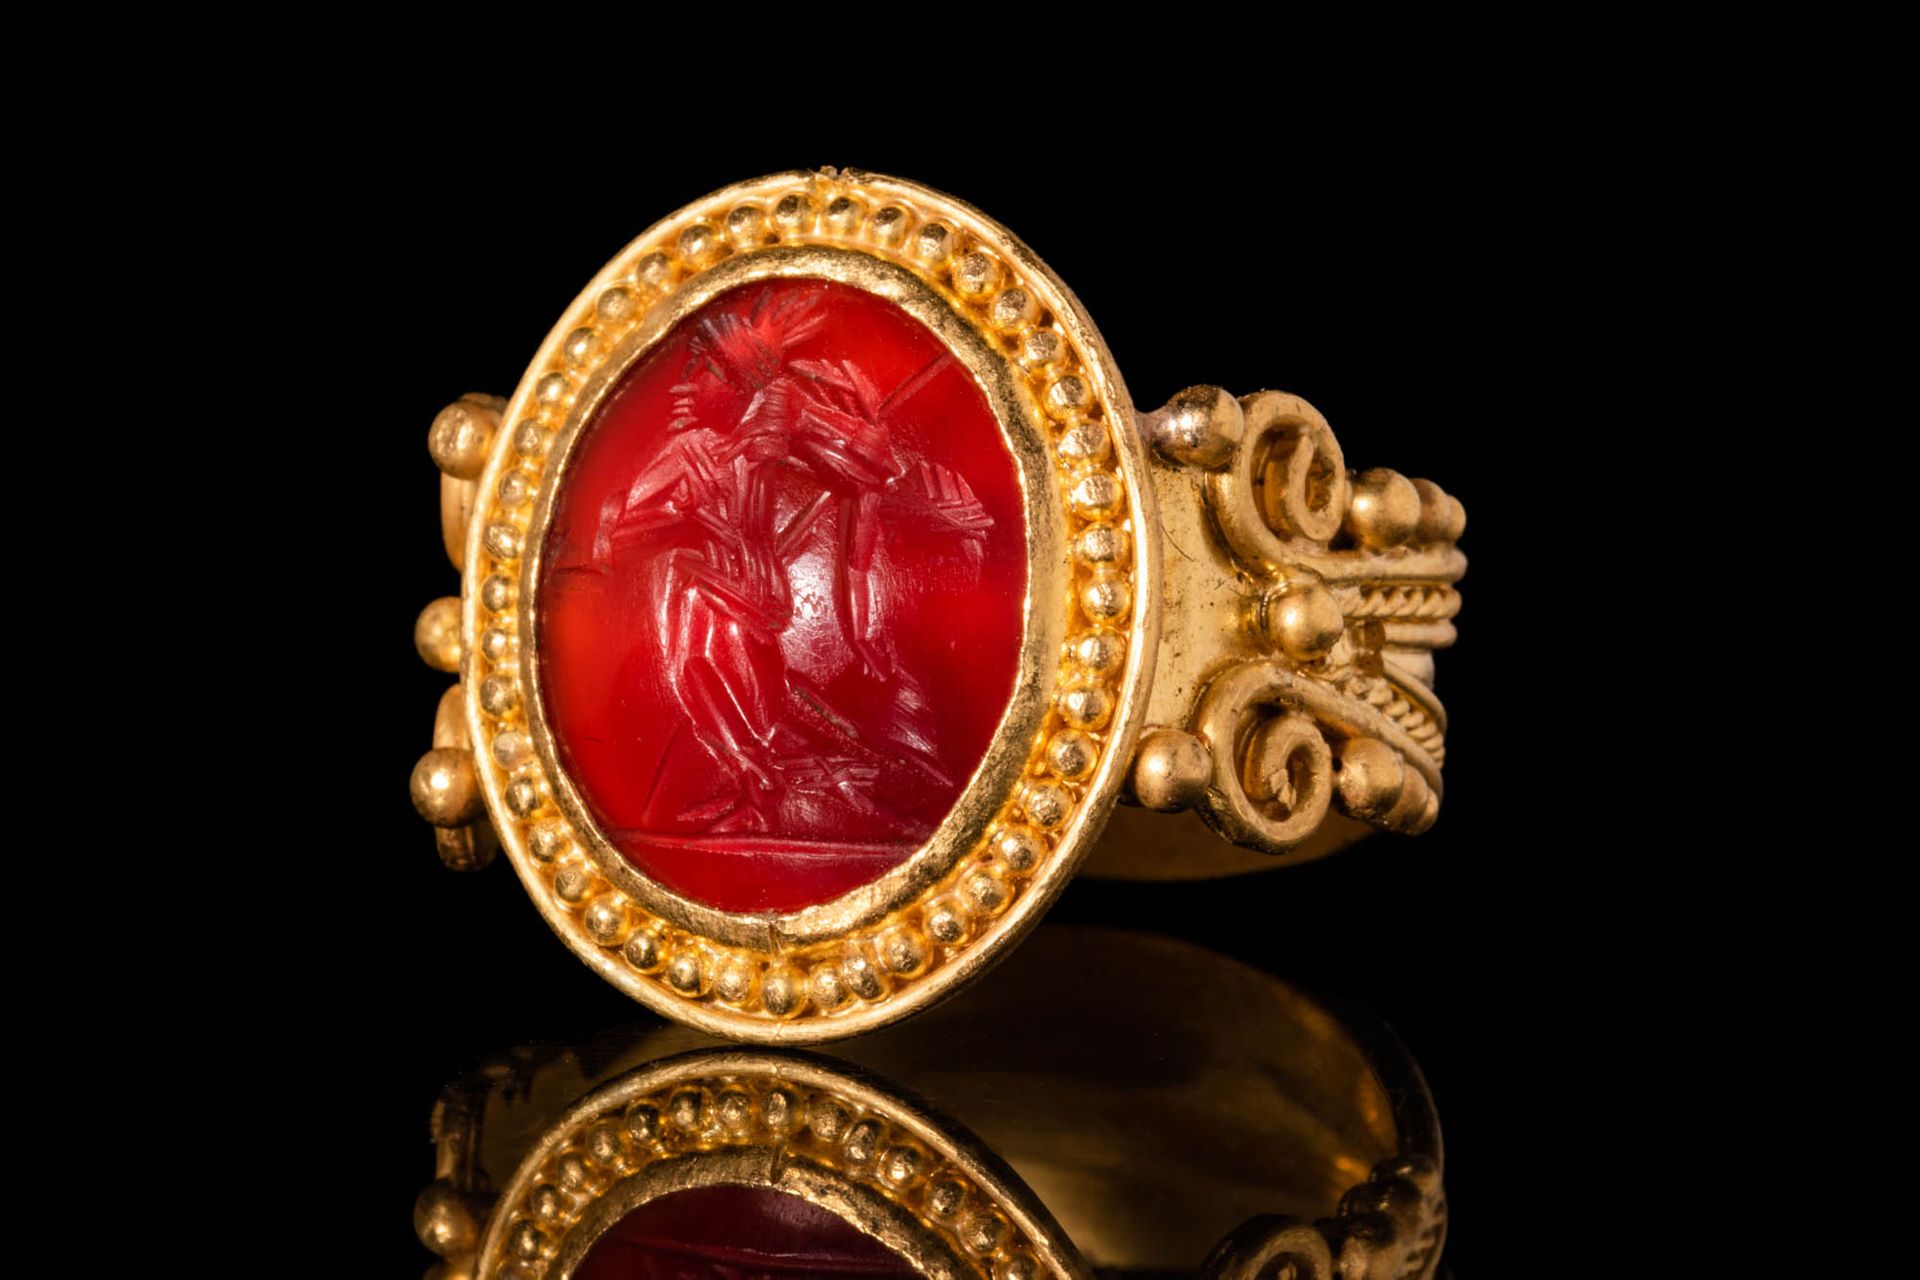 ROMAN INTAGLIO DEPICTING A SOLDIER IN GOLD RING Ca. 100 BC - 50 AD.
Intaille rom&hellip;